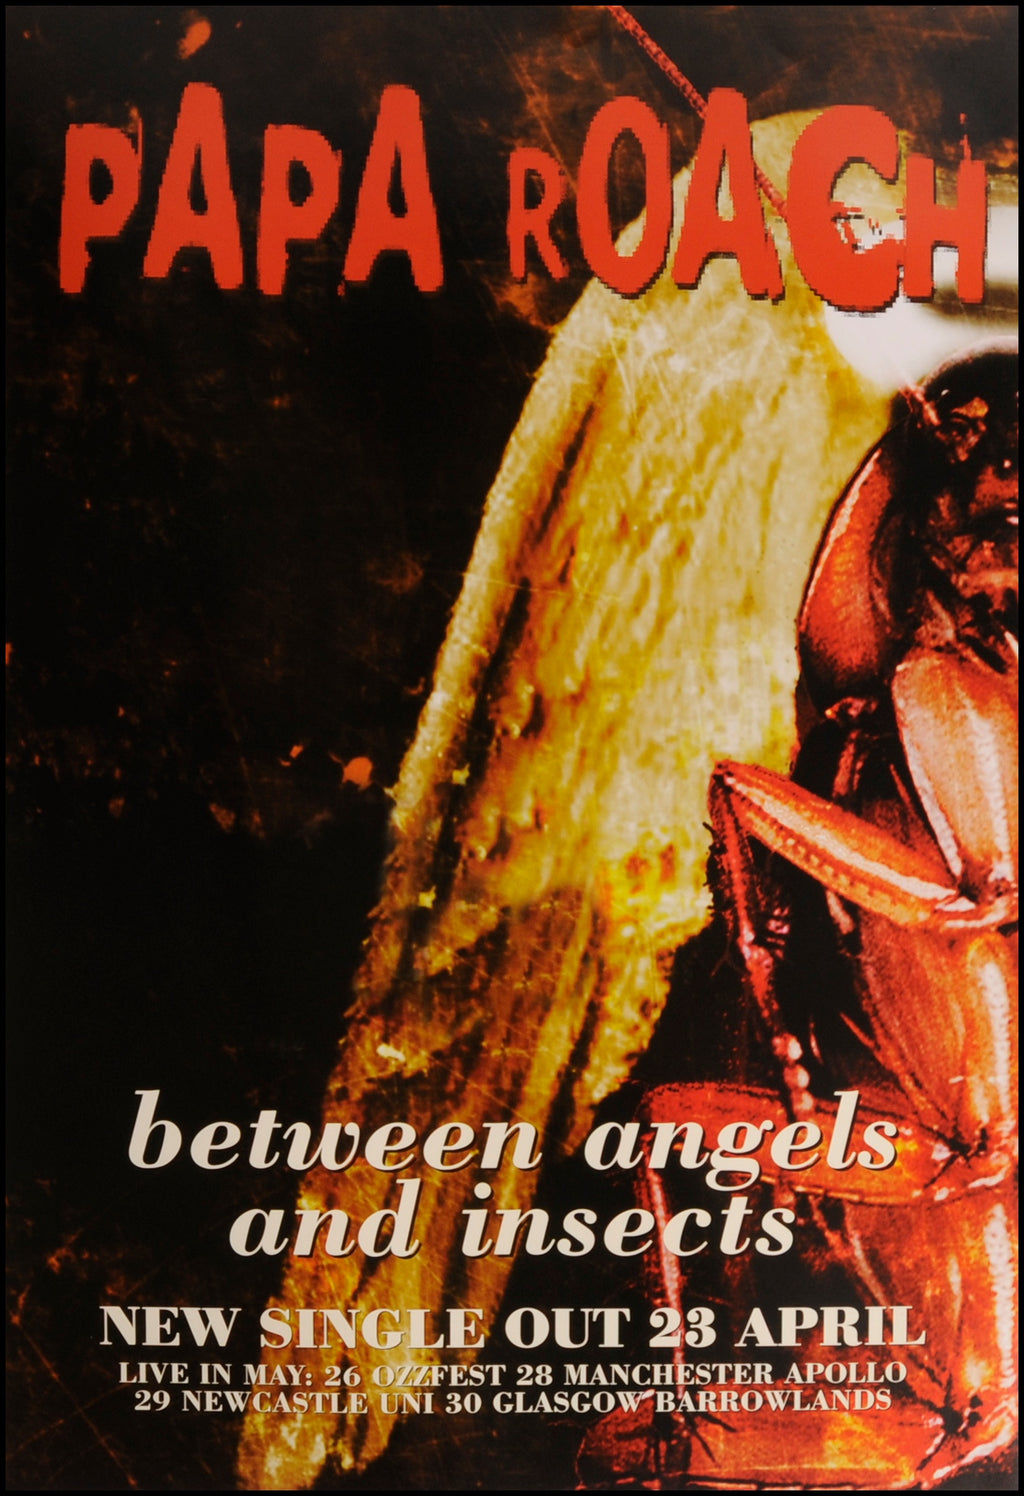 Papa Roach poster - Between angels and insects